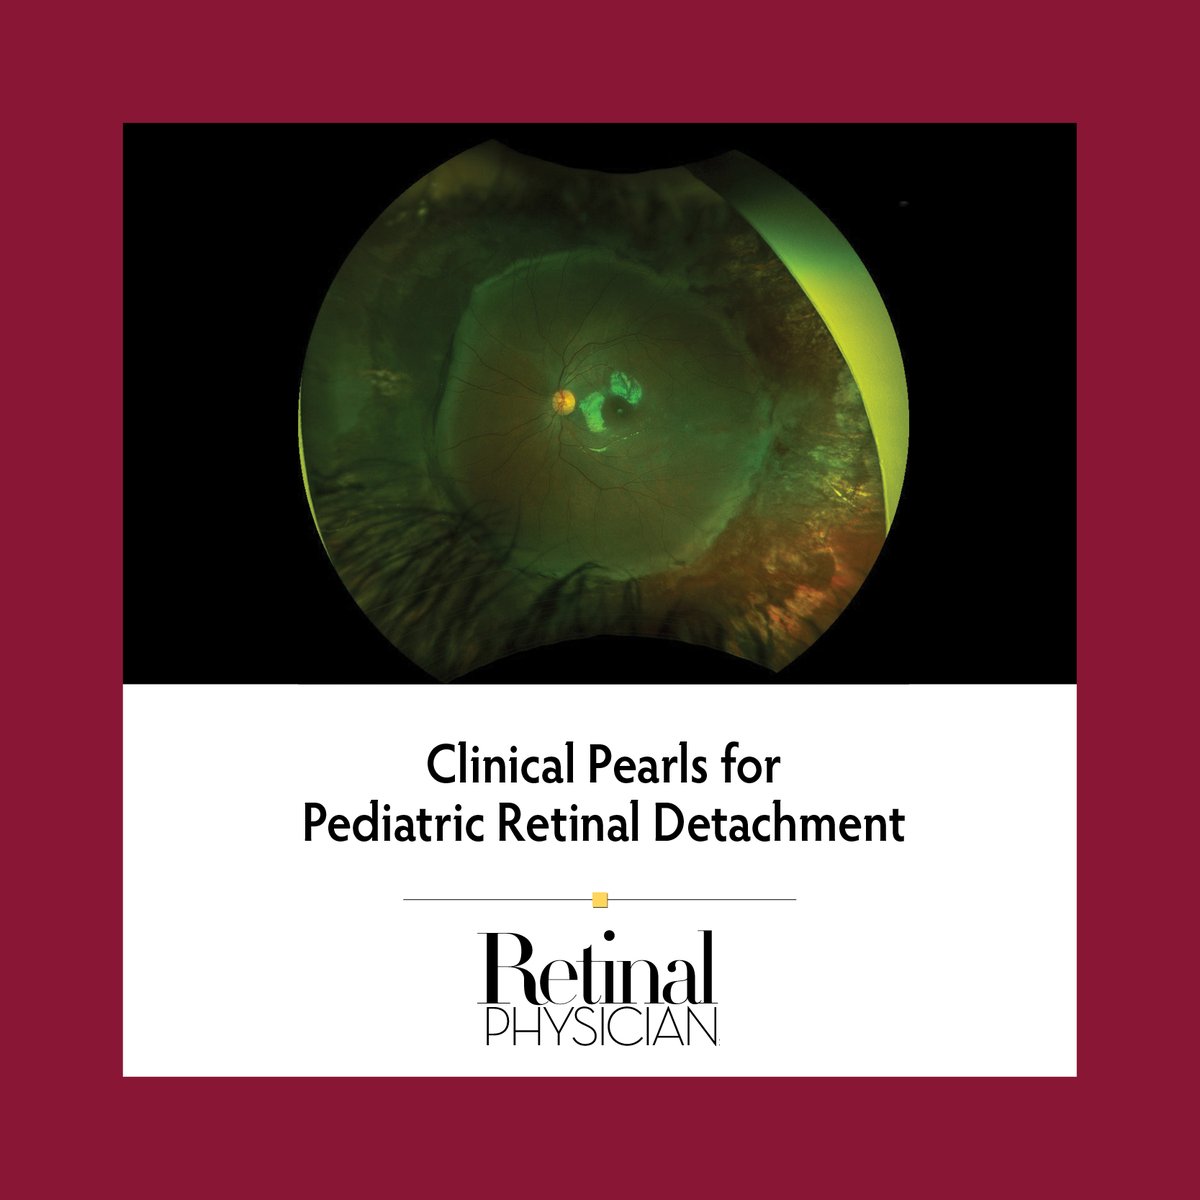 Drs. Ghalibafan, Cai, Berrocal, and Yannuzzi describe etiology, presentation, diagnosis, and management of pediatric retinal detachment: retinalphysician.com/issues/2023/no… #ophthalmology #retinaldetachment #pediatricretinaldetachment